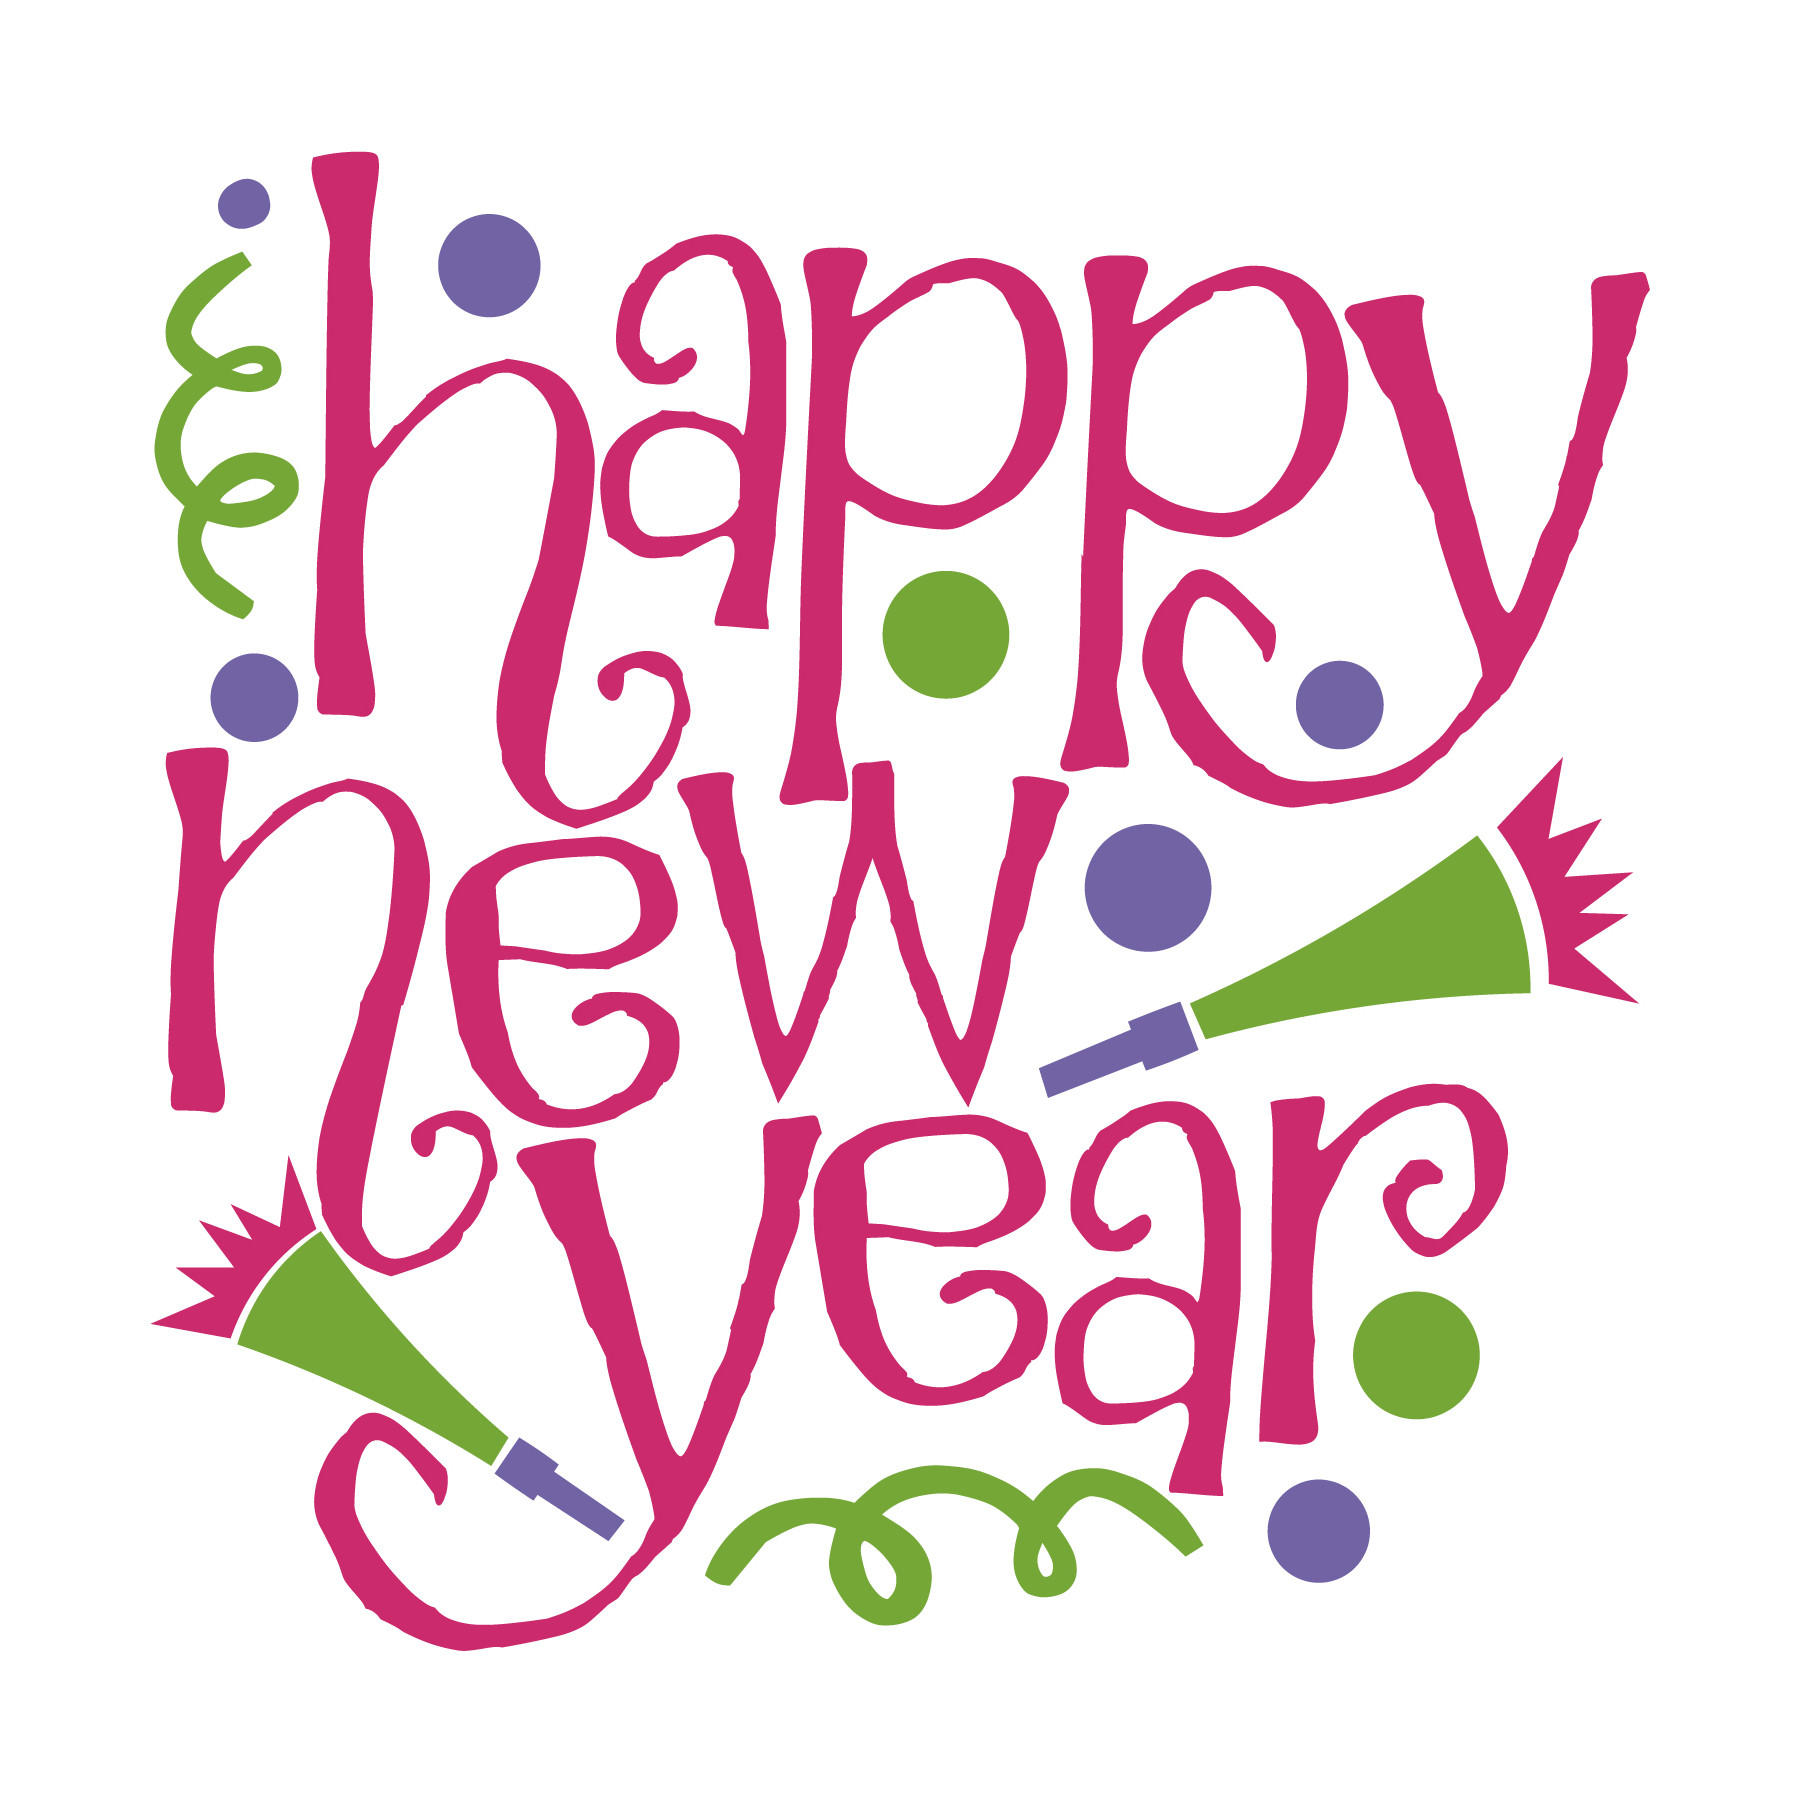 free clipart new years 2015 - photo #24